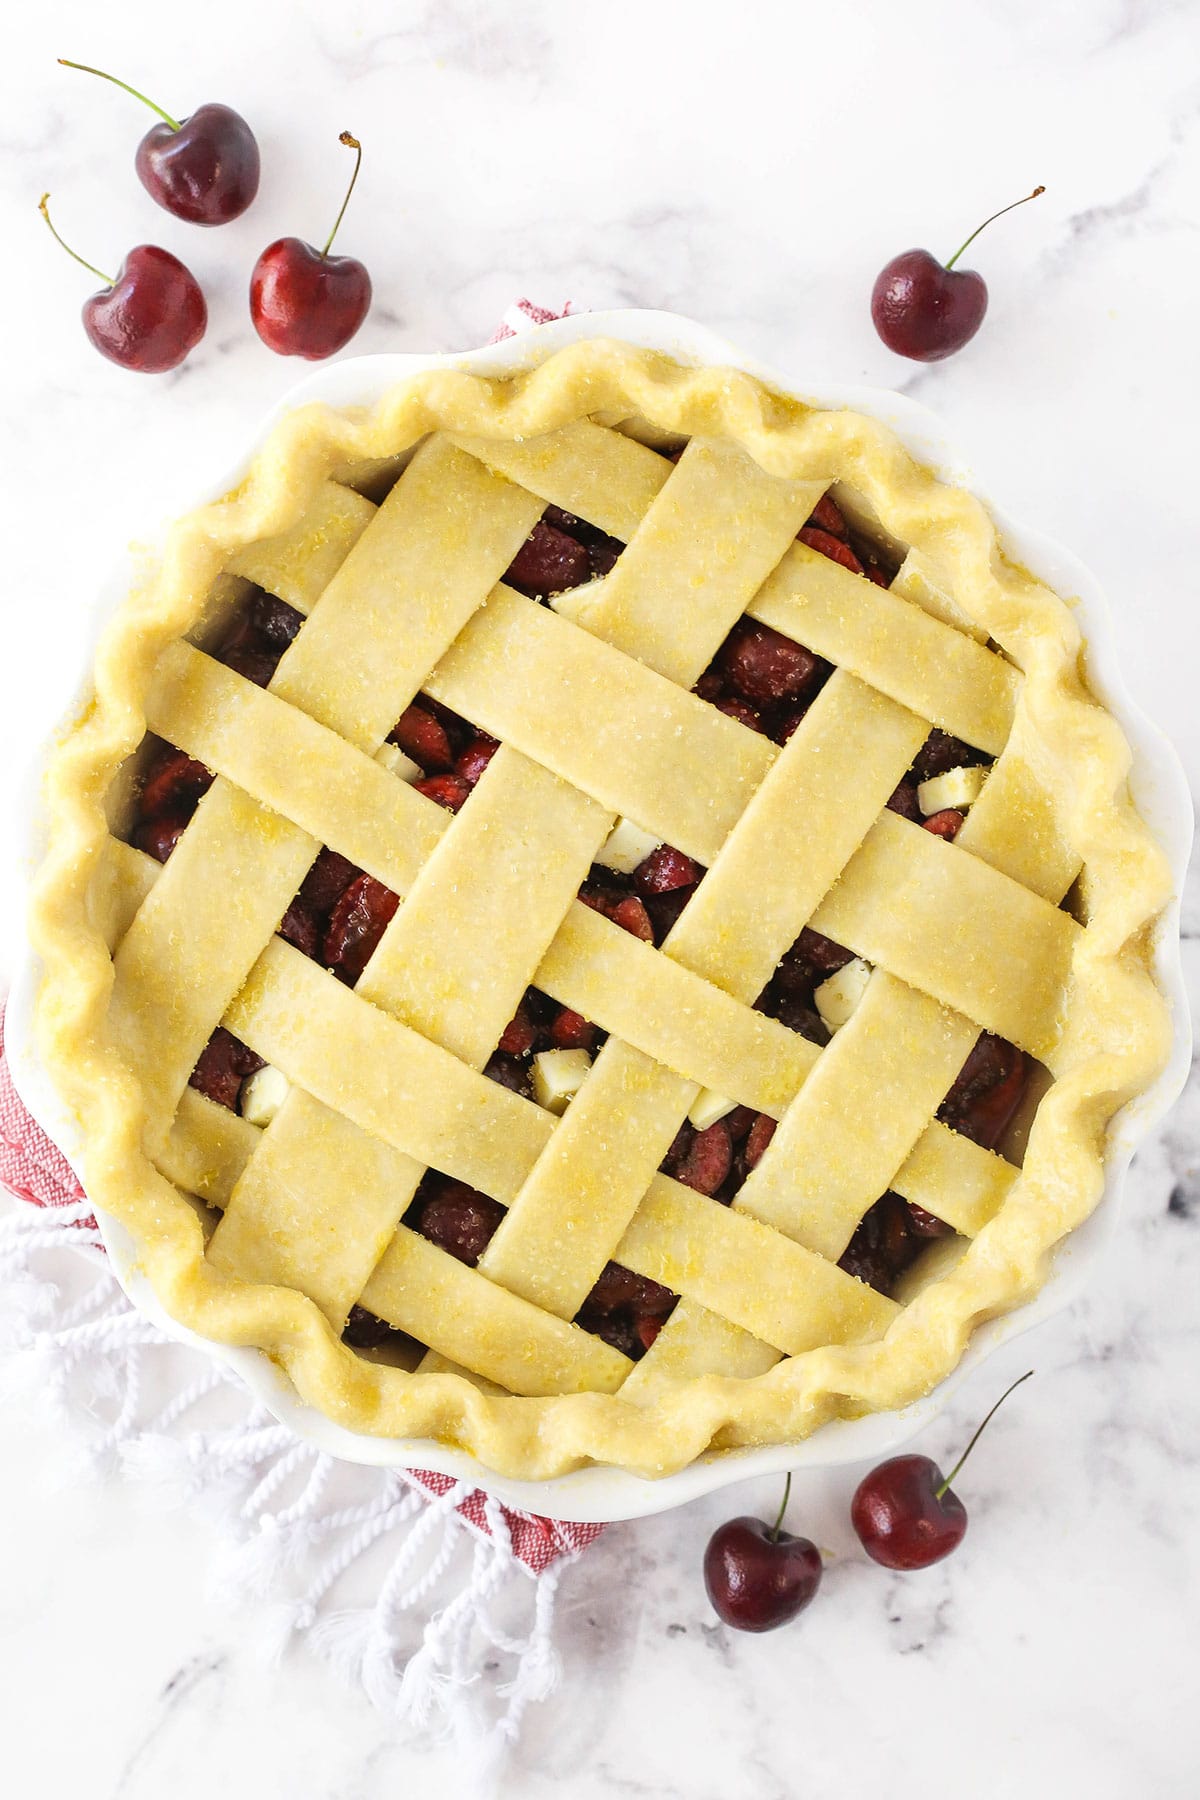 An unbaked pie with a lattice crust on top after it has been brushed with eggwash and sprinkled with turbinado sugar